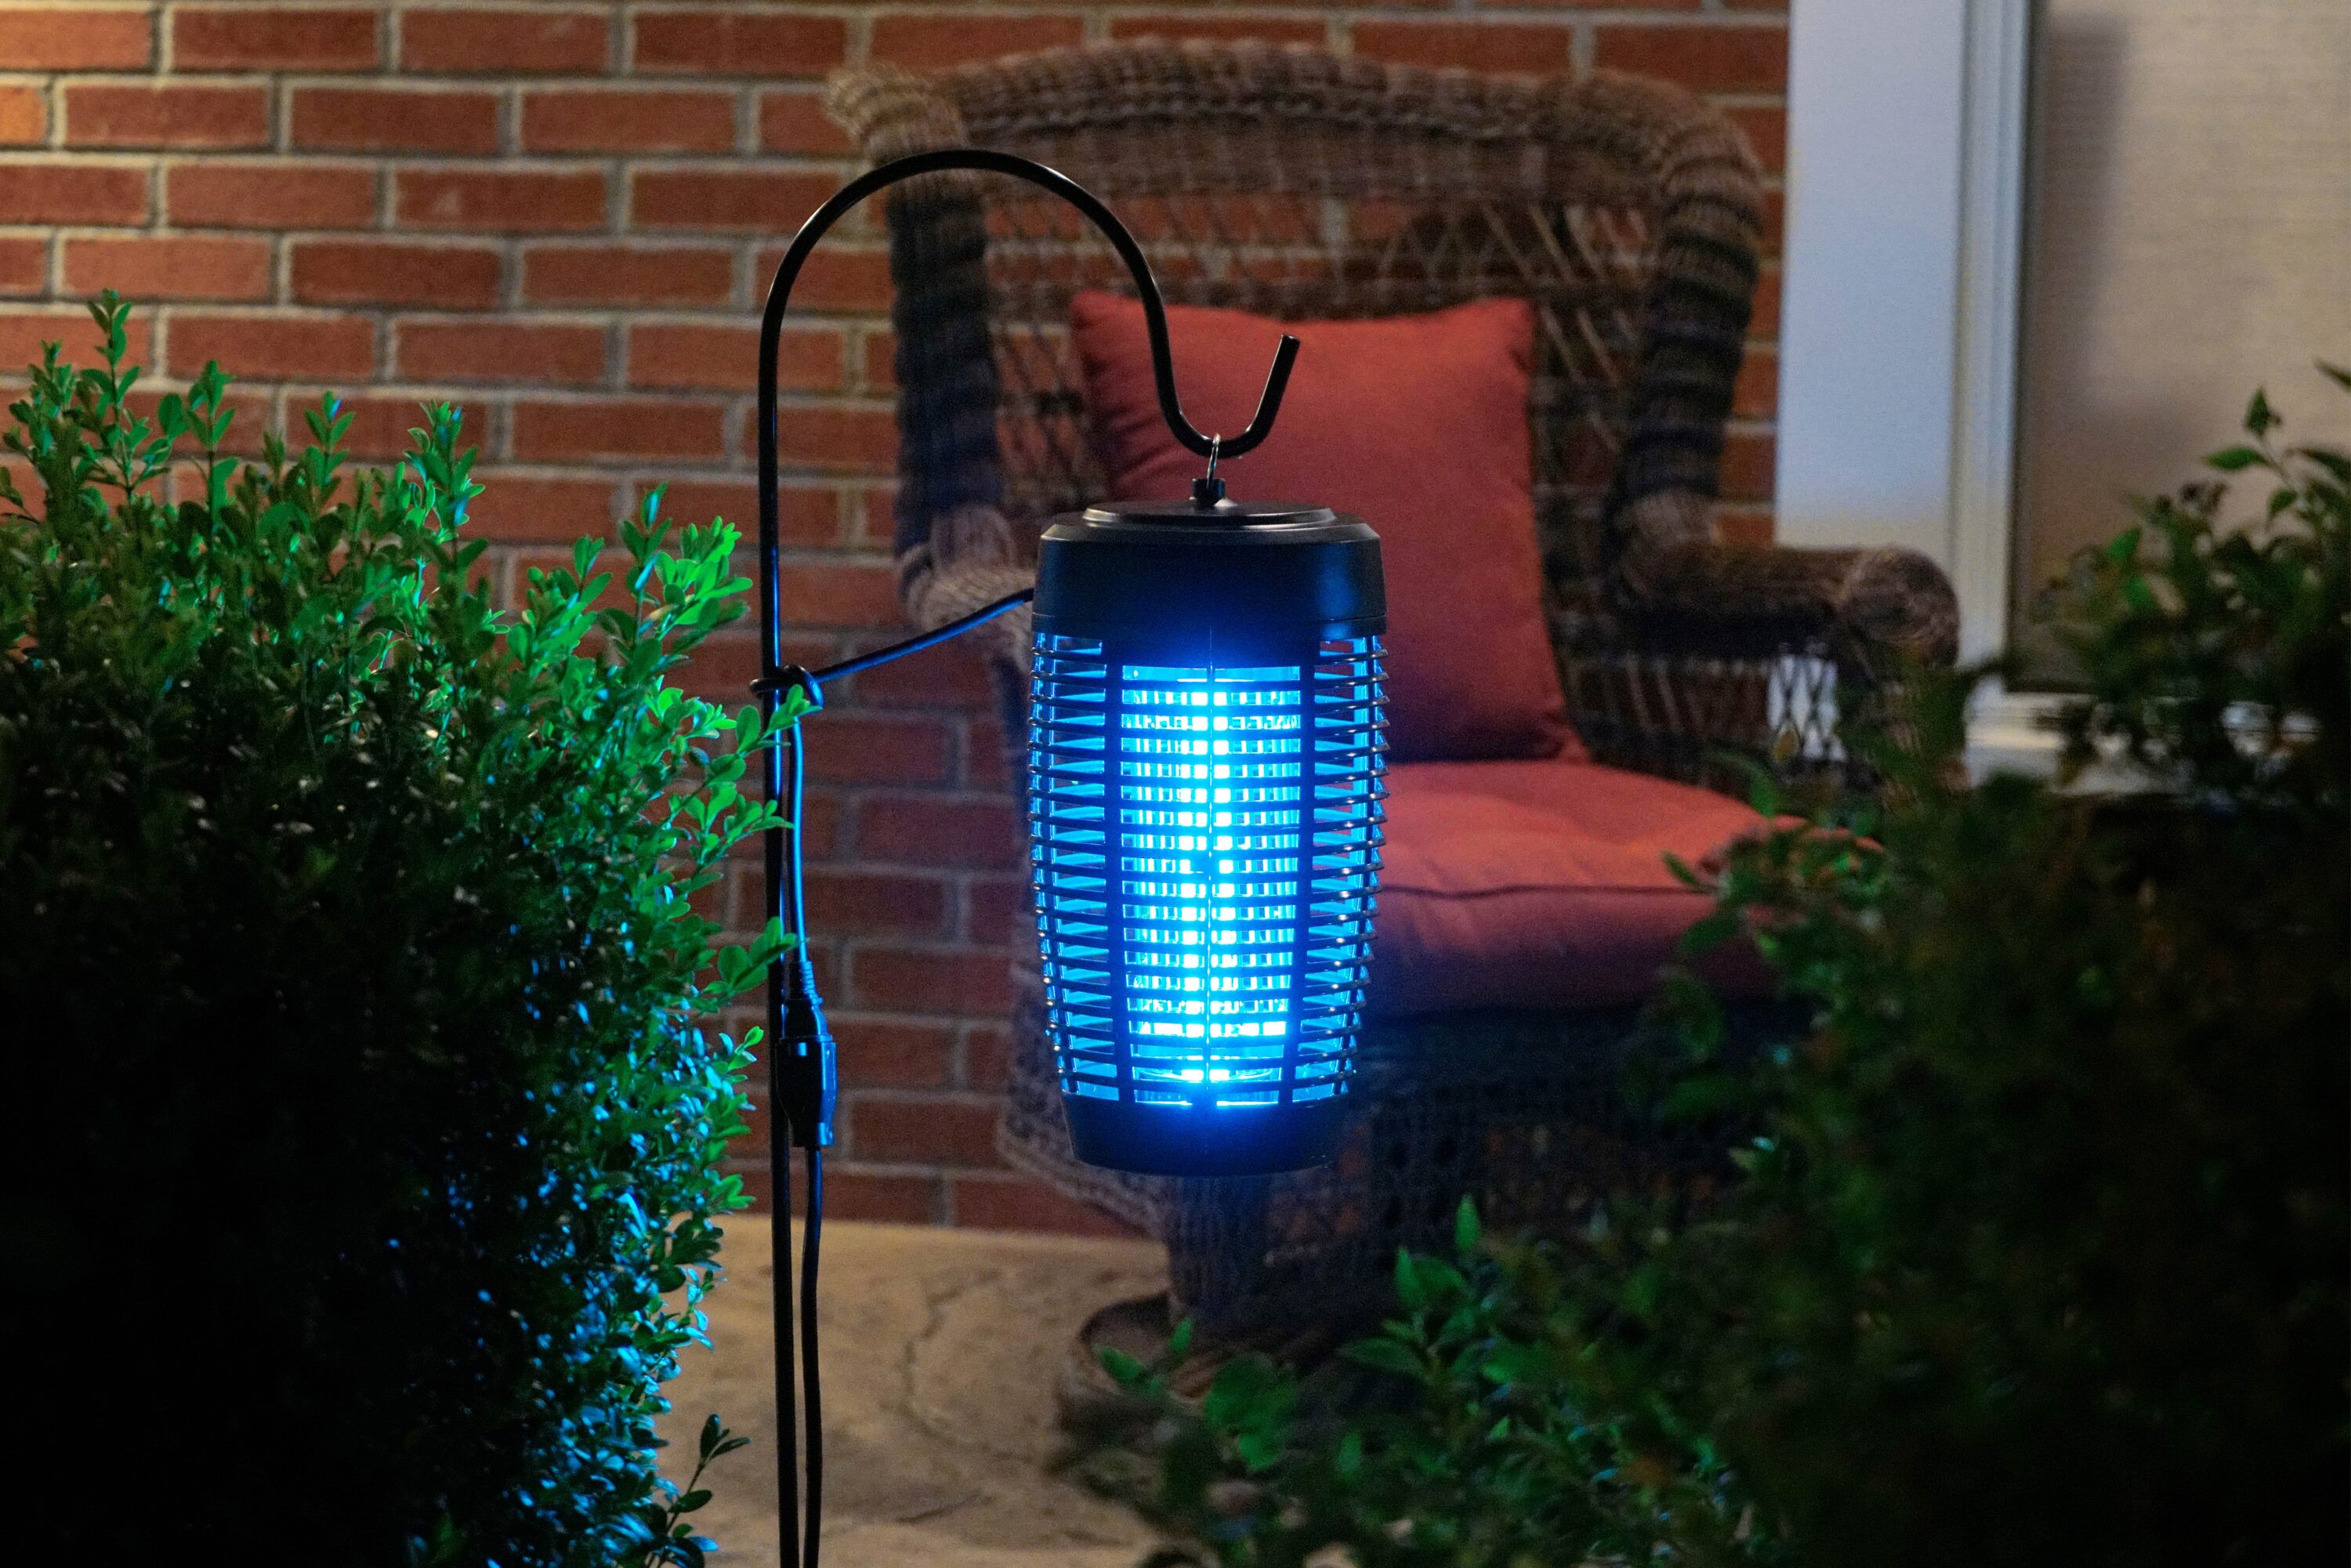 PIC 40W bug zapper Outdoor Insect Trap in the Insect Traps department at